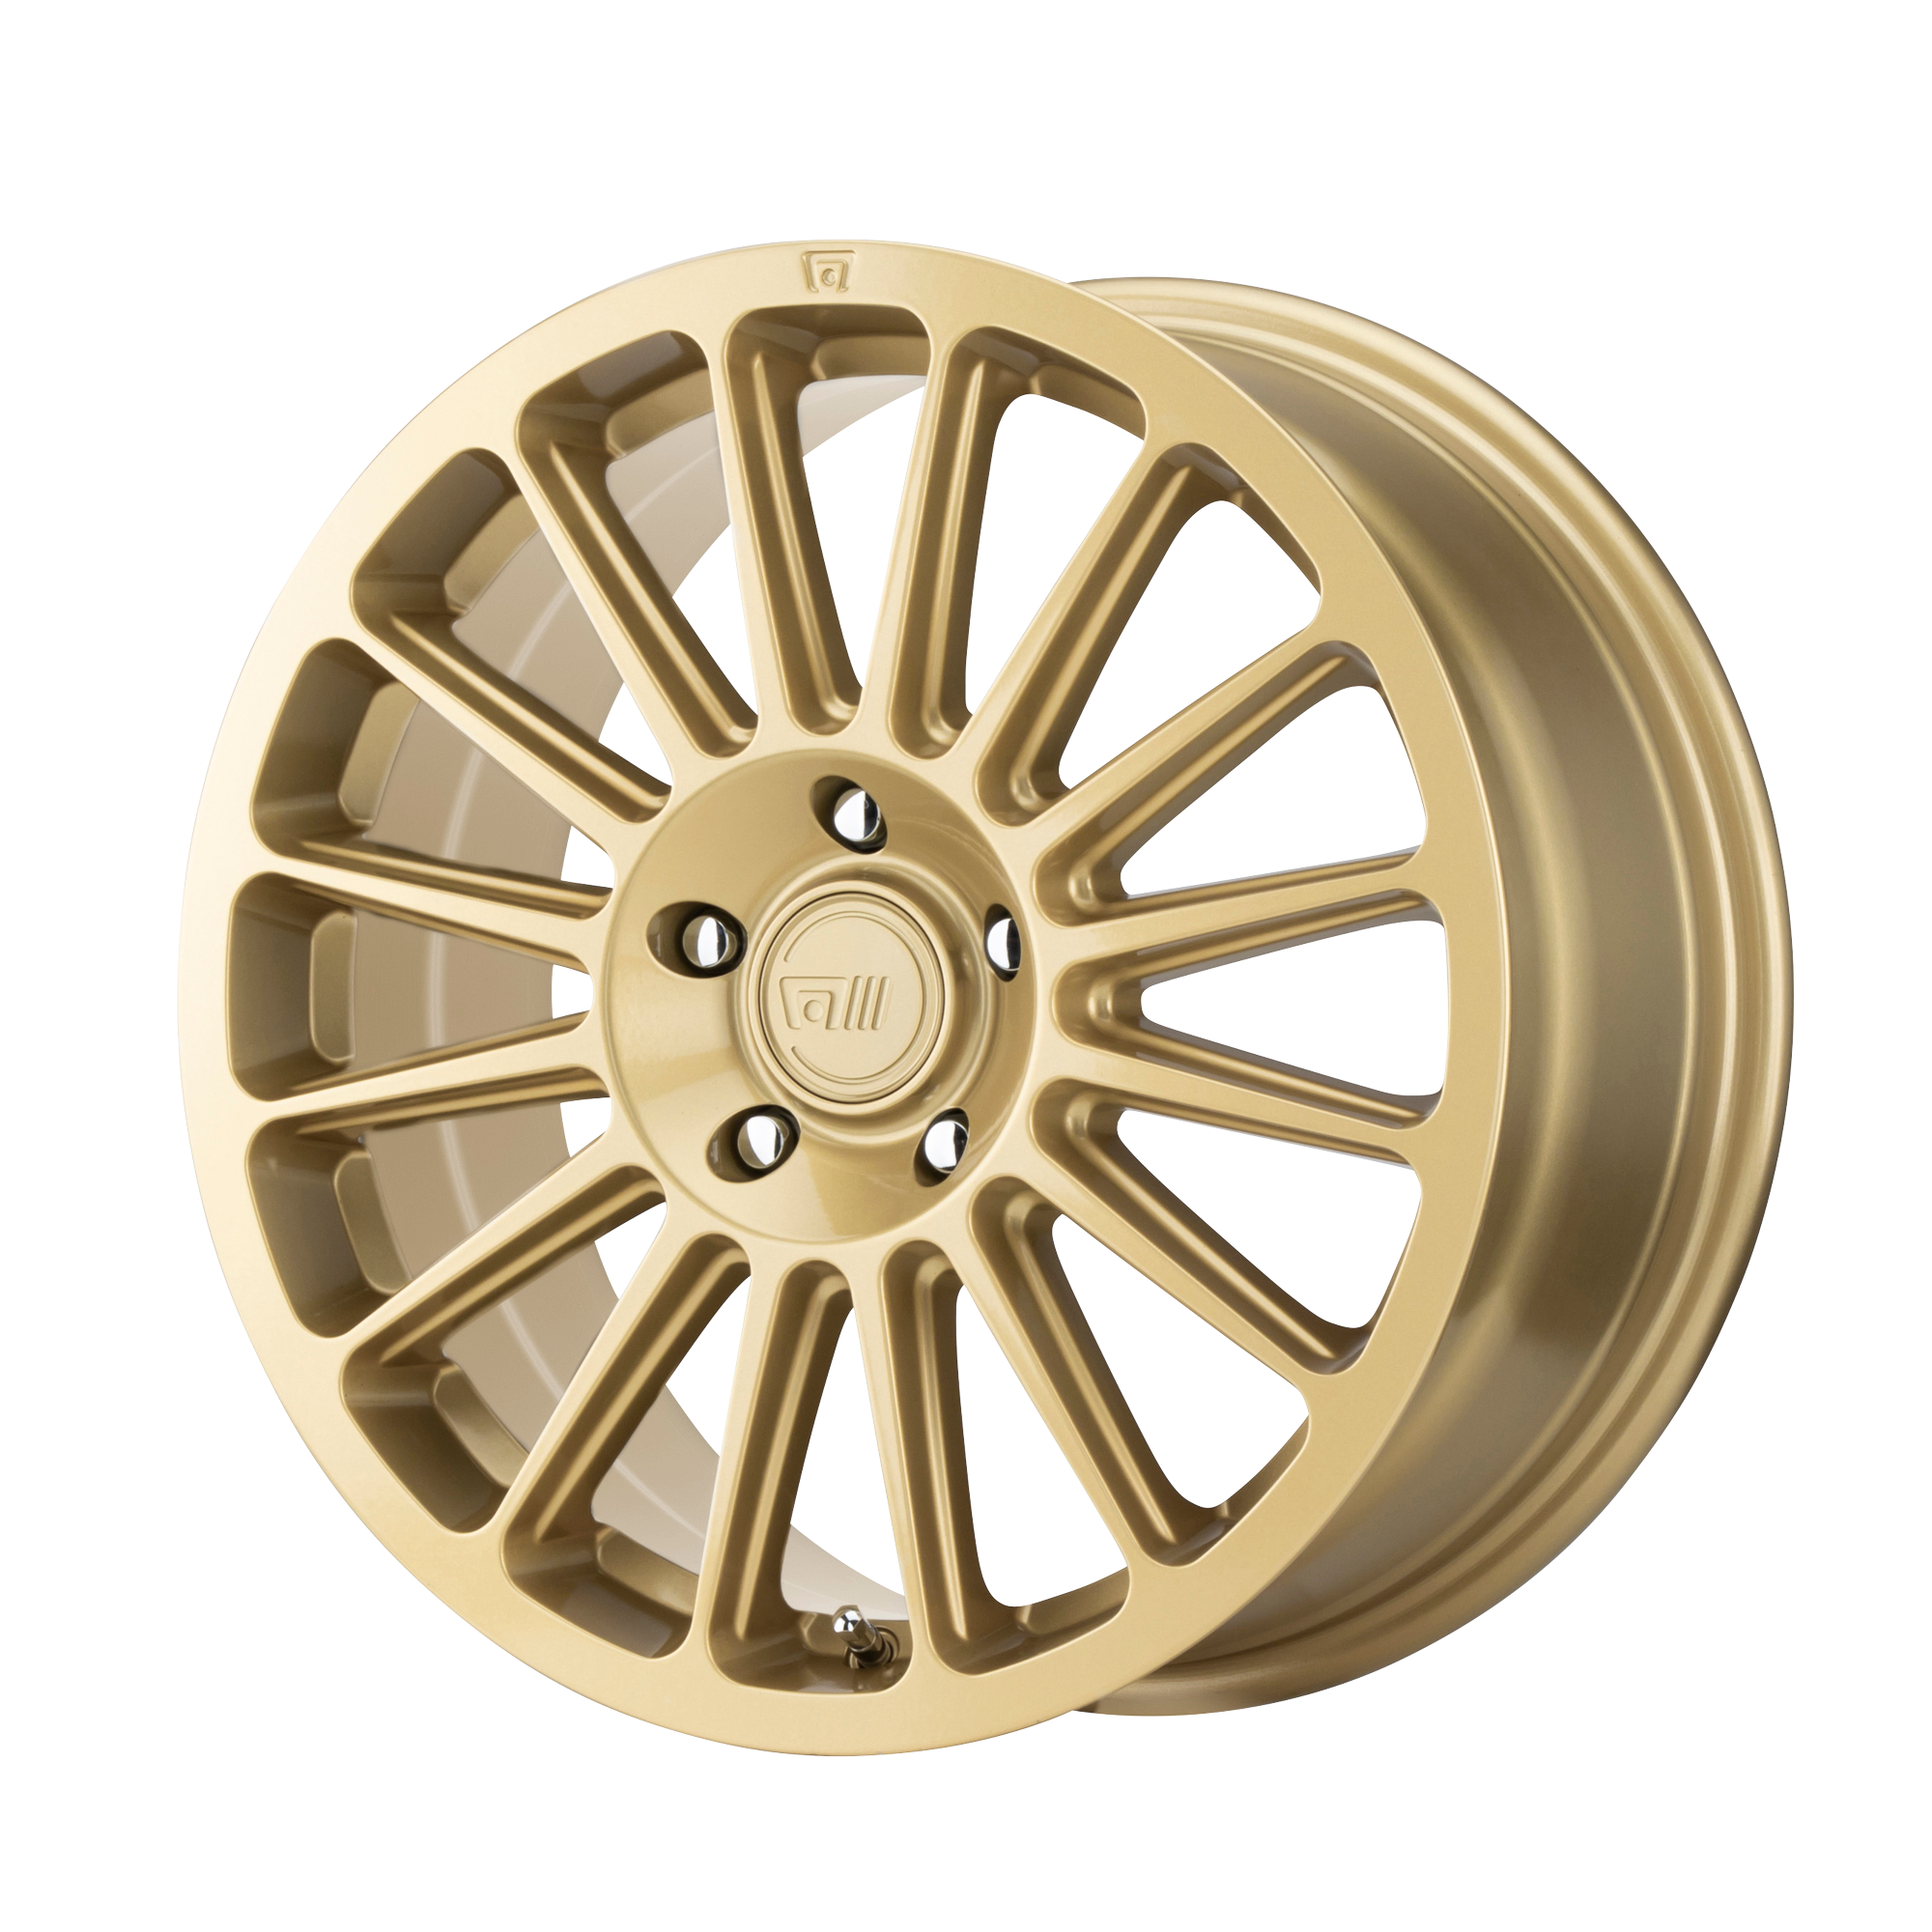 MR141 16x7.5 5x112.00 RALLY GOLD (40 mm) - Tires and Engine Performance